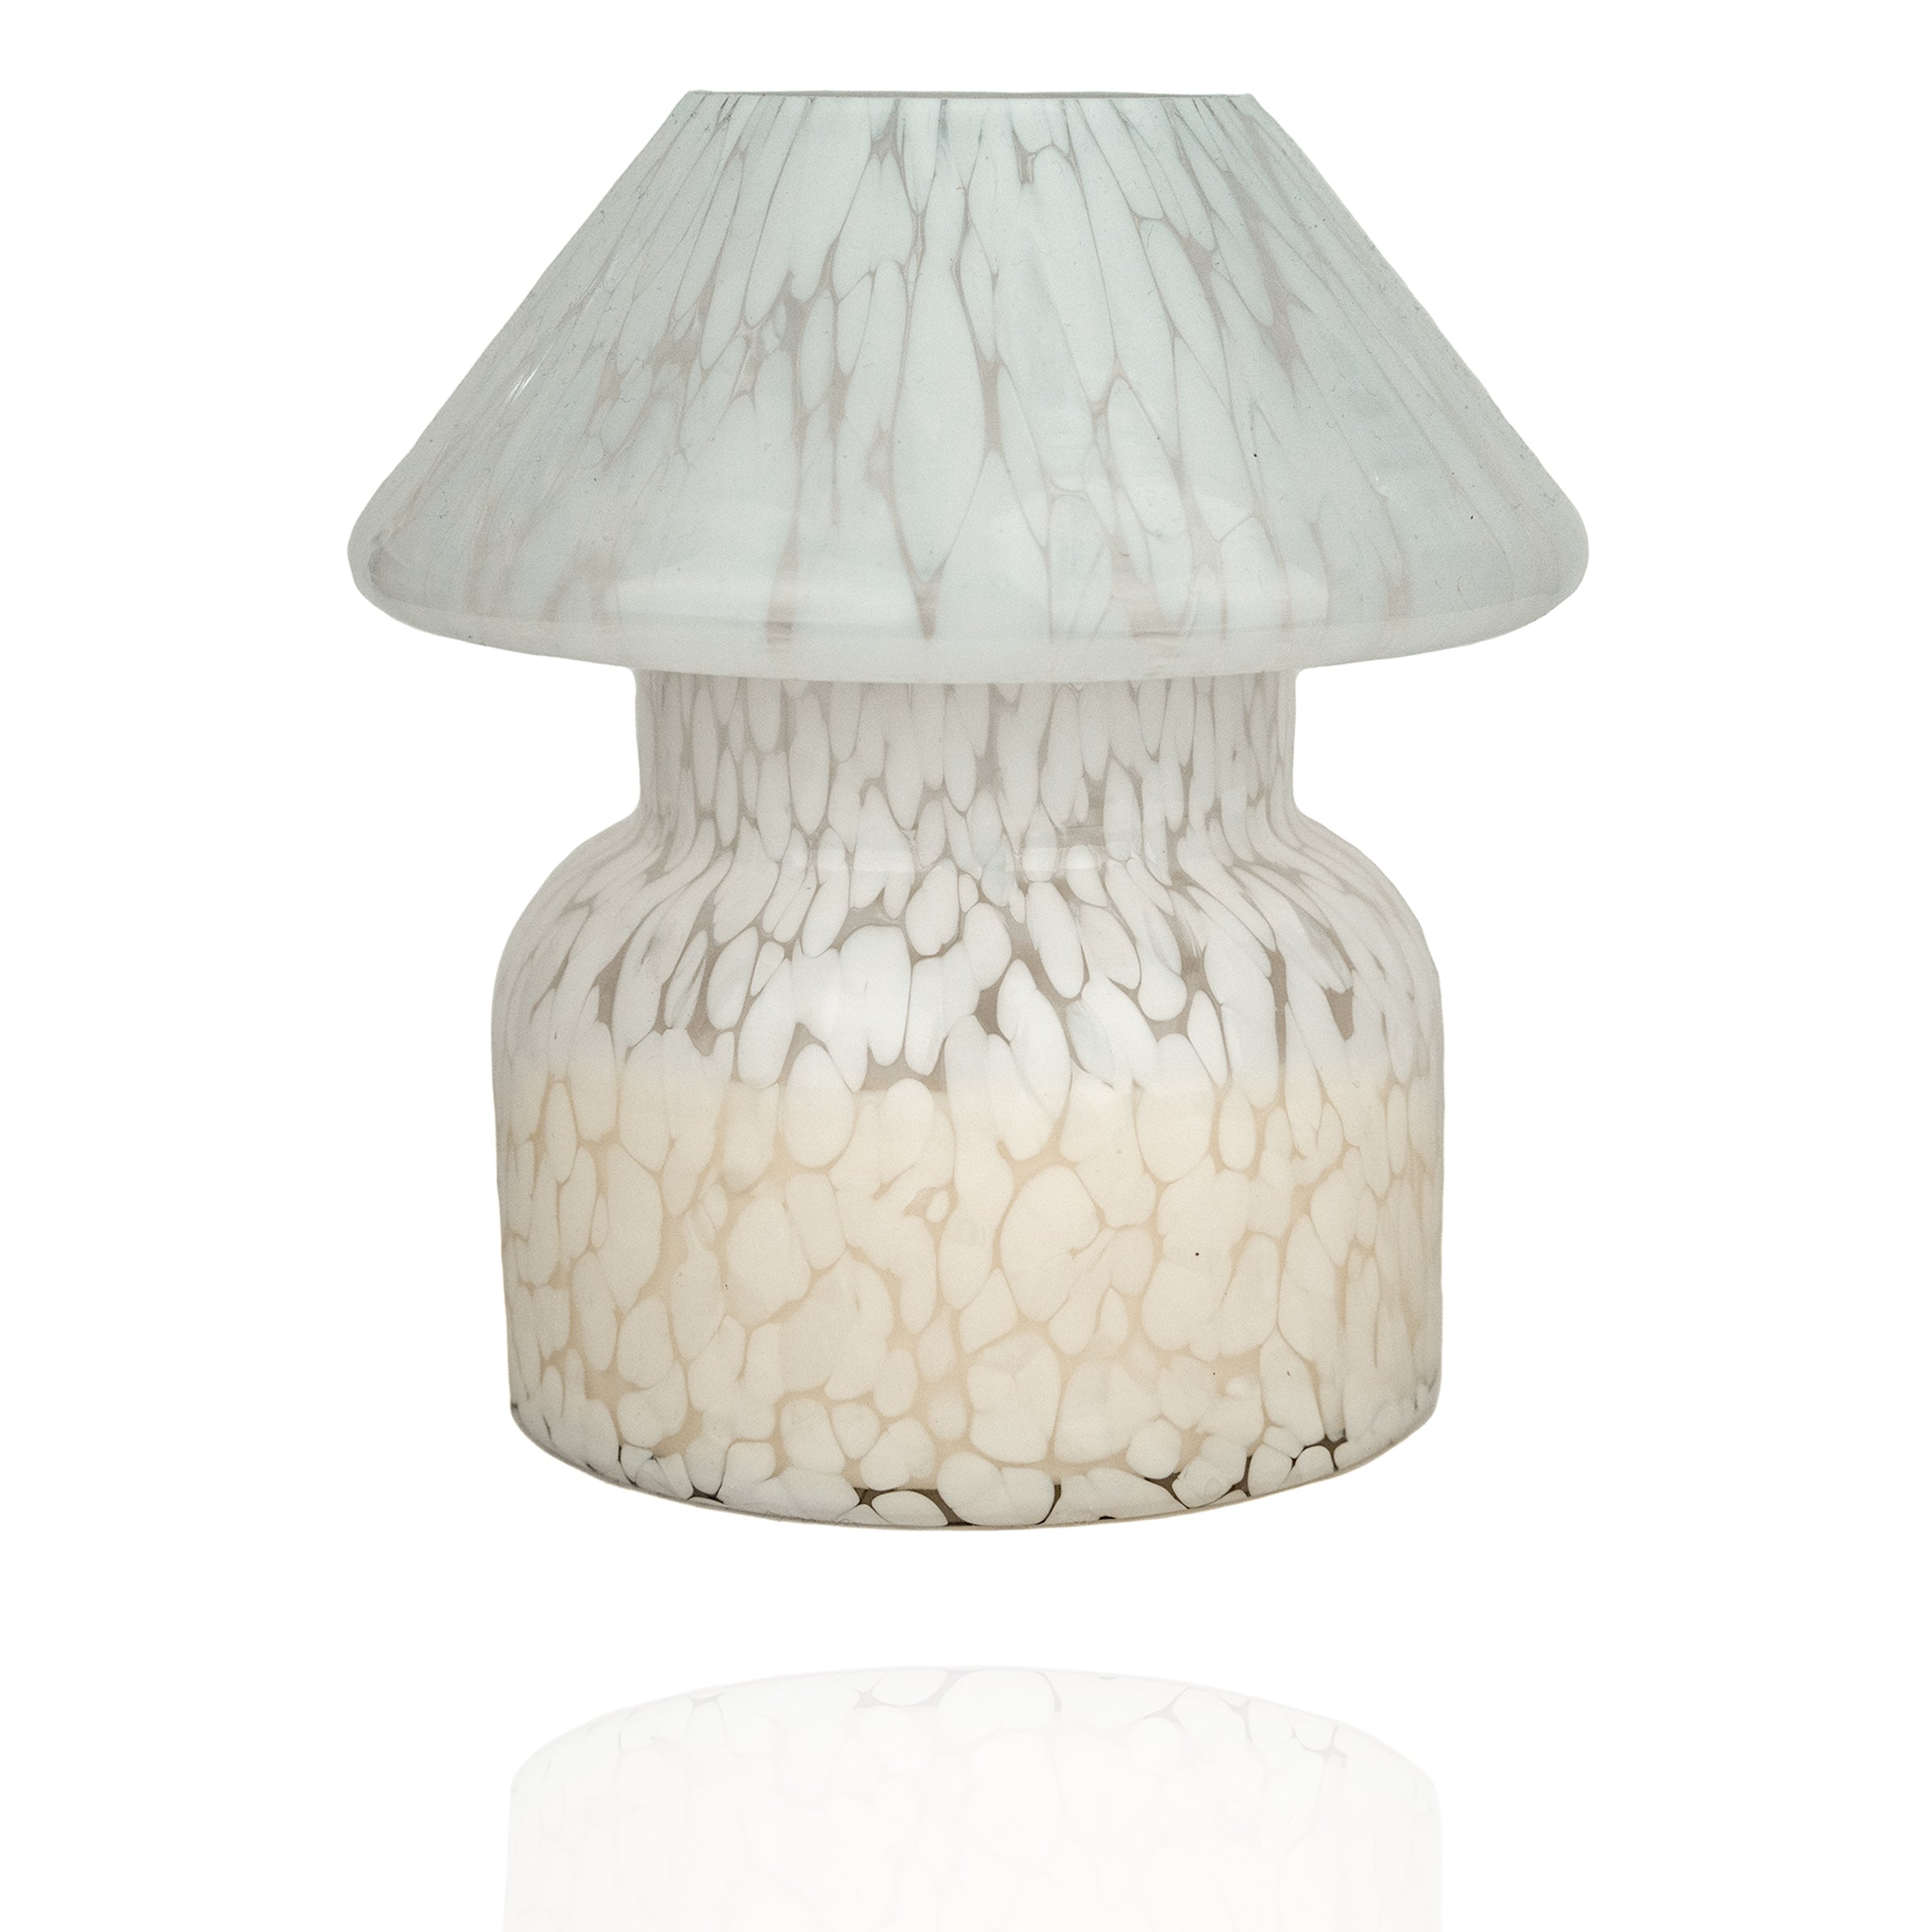 Mushroom candle lamp with white spots on clear glass. Filled with 100% soy wax.